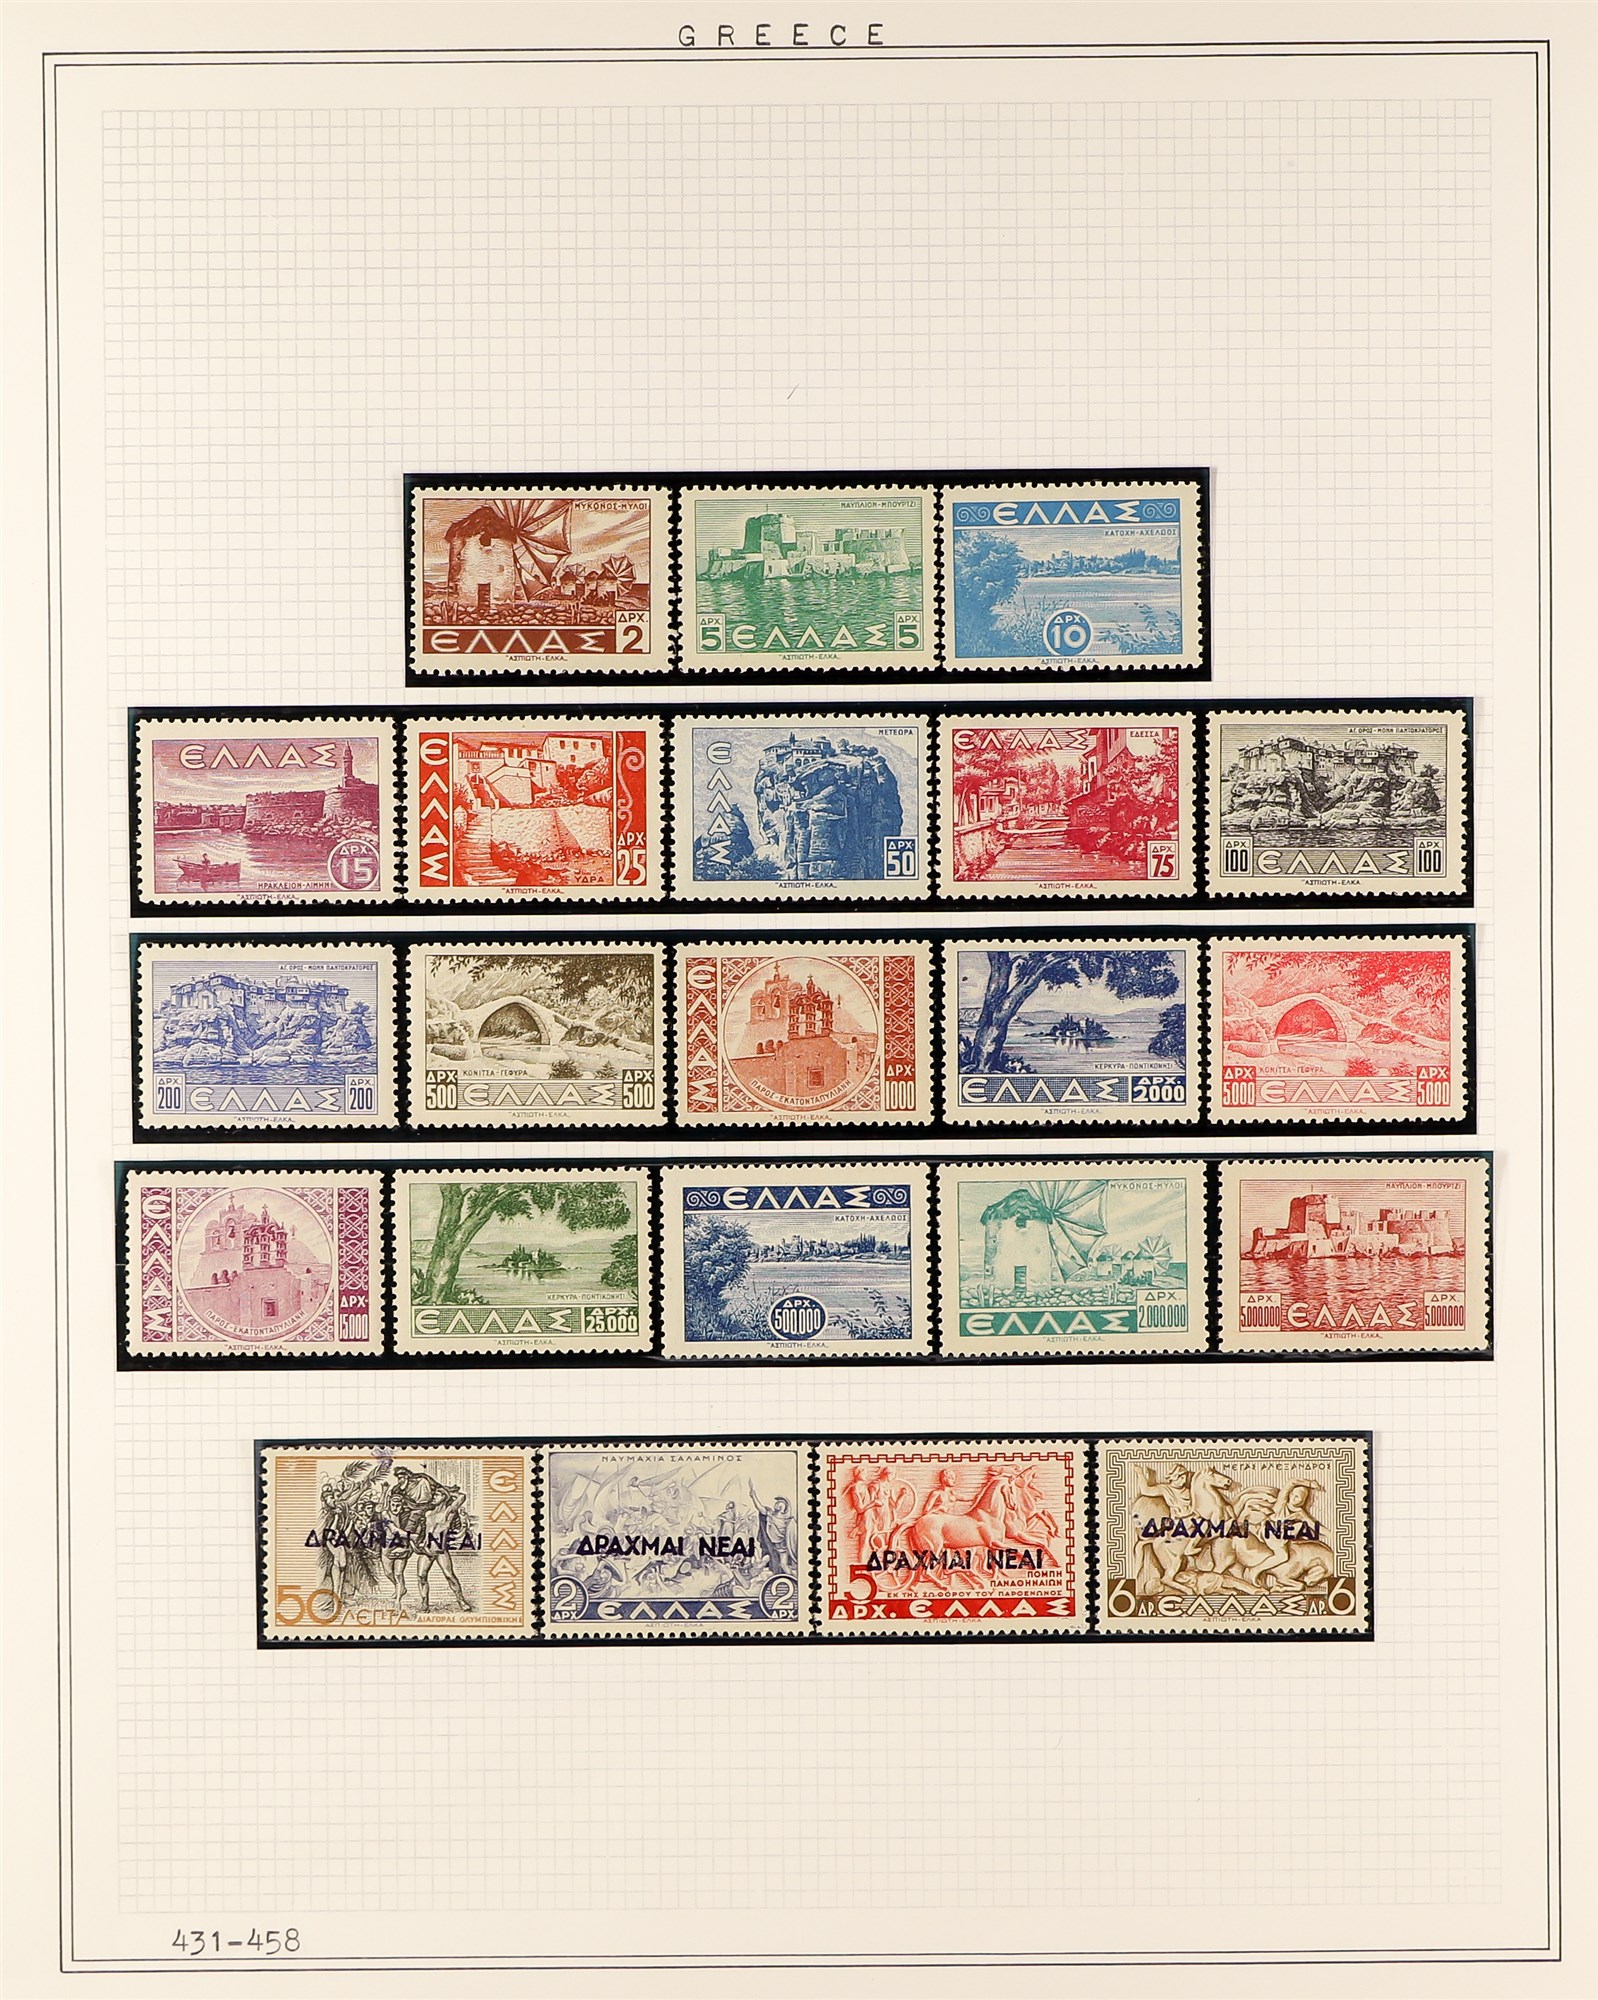 GREECE 1936-55 NEVER HINGED MINT COLLECTION incl. 1937 King set, 1938 6d Balkan Entente, 1939 Ionian - Image 3 of 6